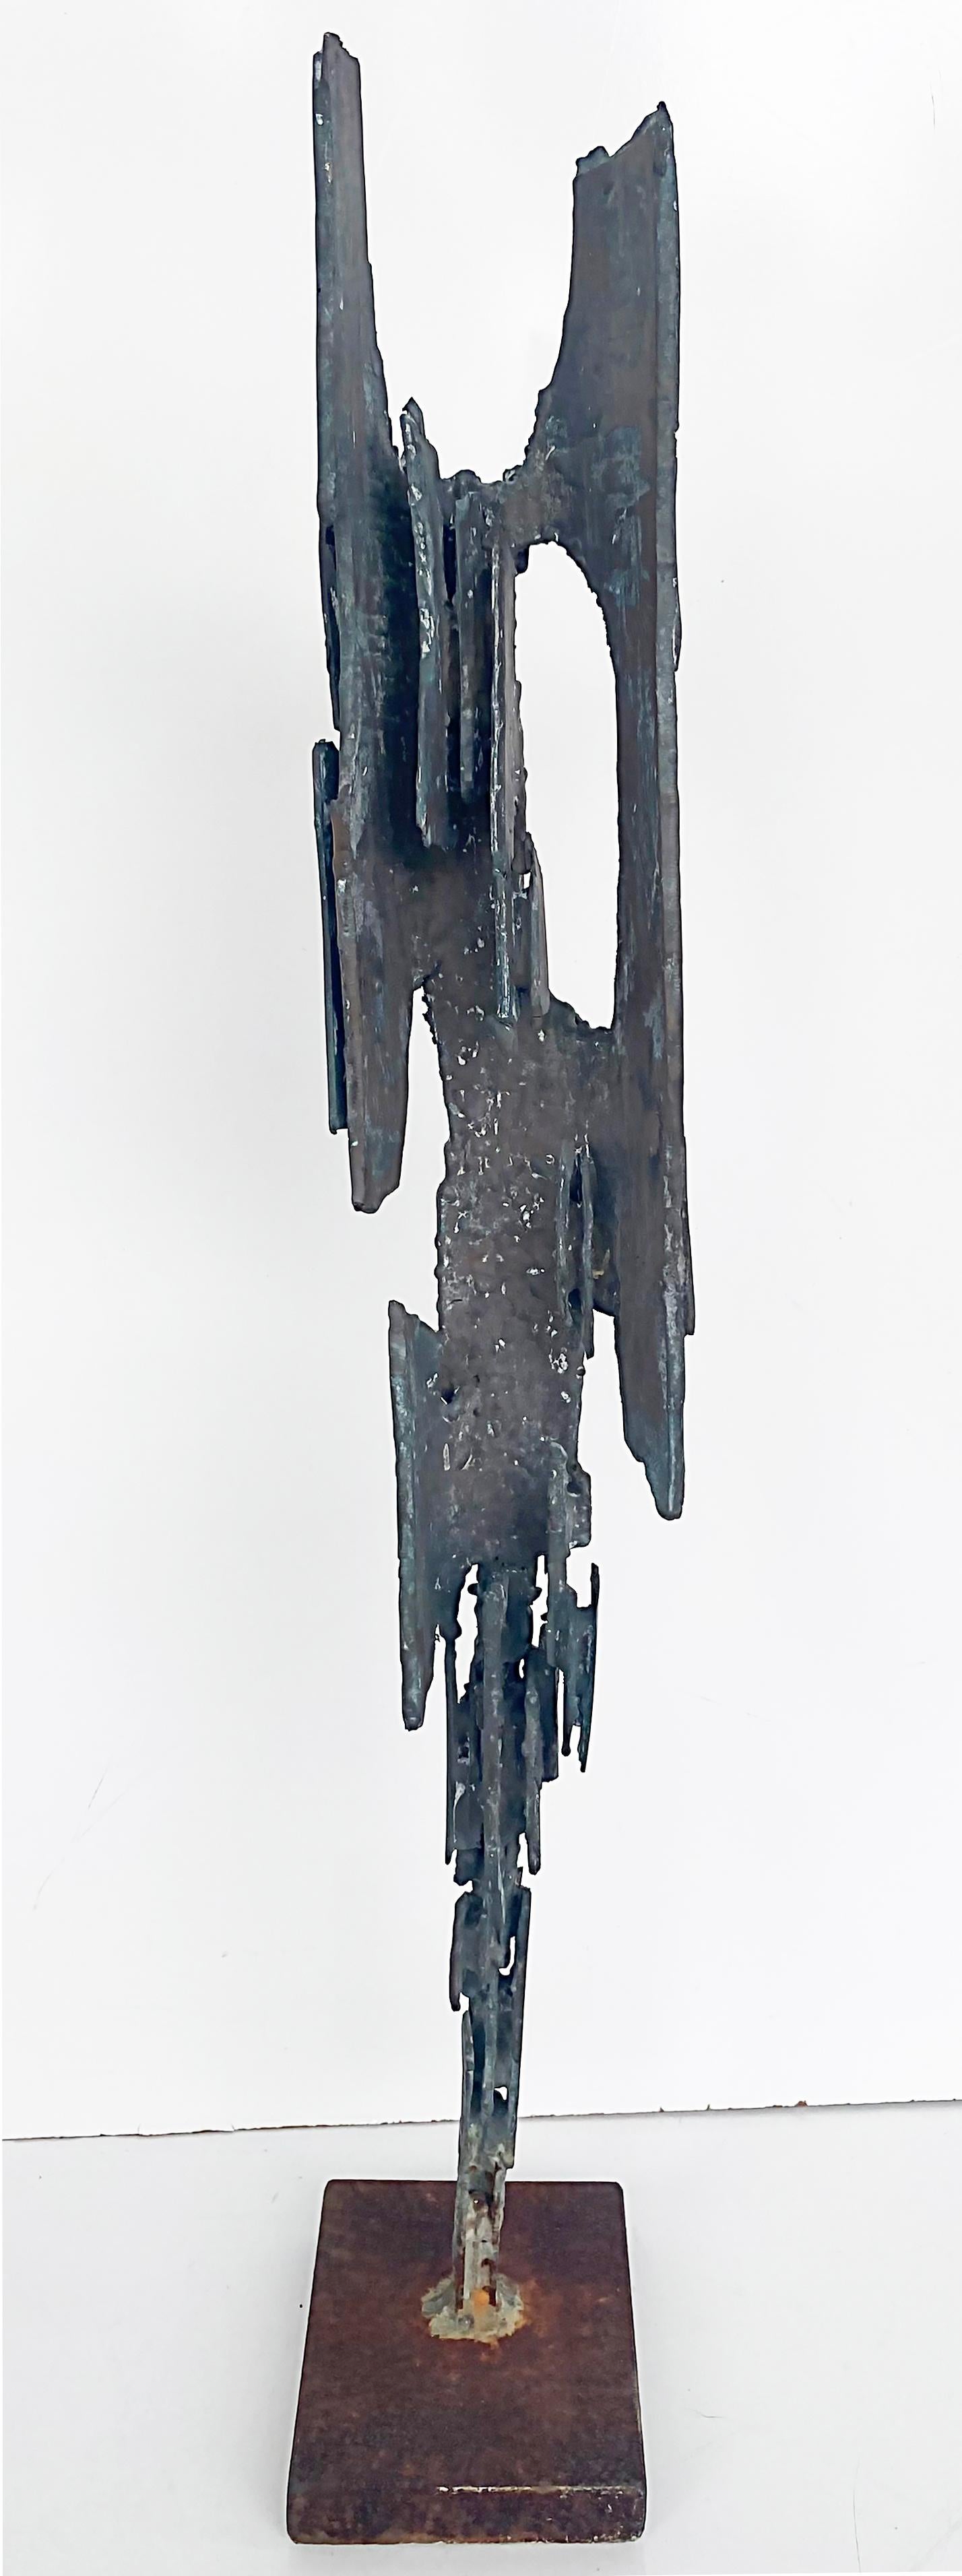 Michel Guino (French, 1926-2013) signed, untitled Brutalist iron sculpture.

Offered for sale is a signed, untitled brutalist iron sculpture by French artist Michel Guino (1926-2013). This sculpture adorned a sculpture garden in the Hamptons New